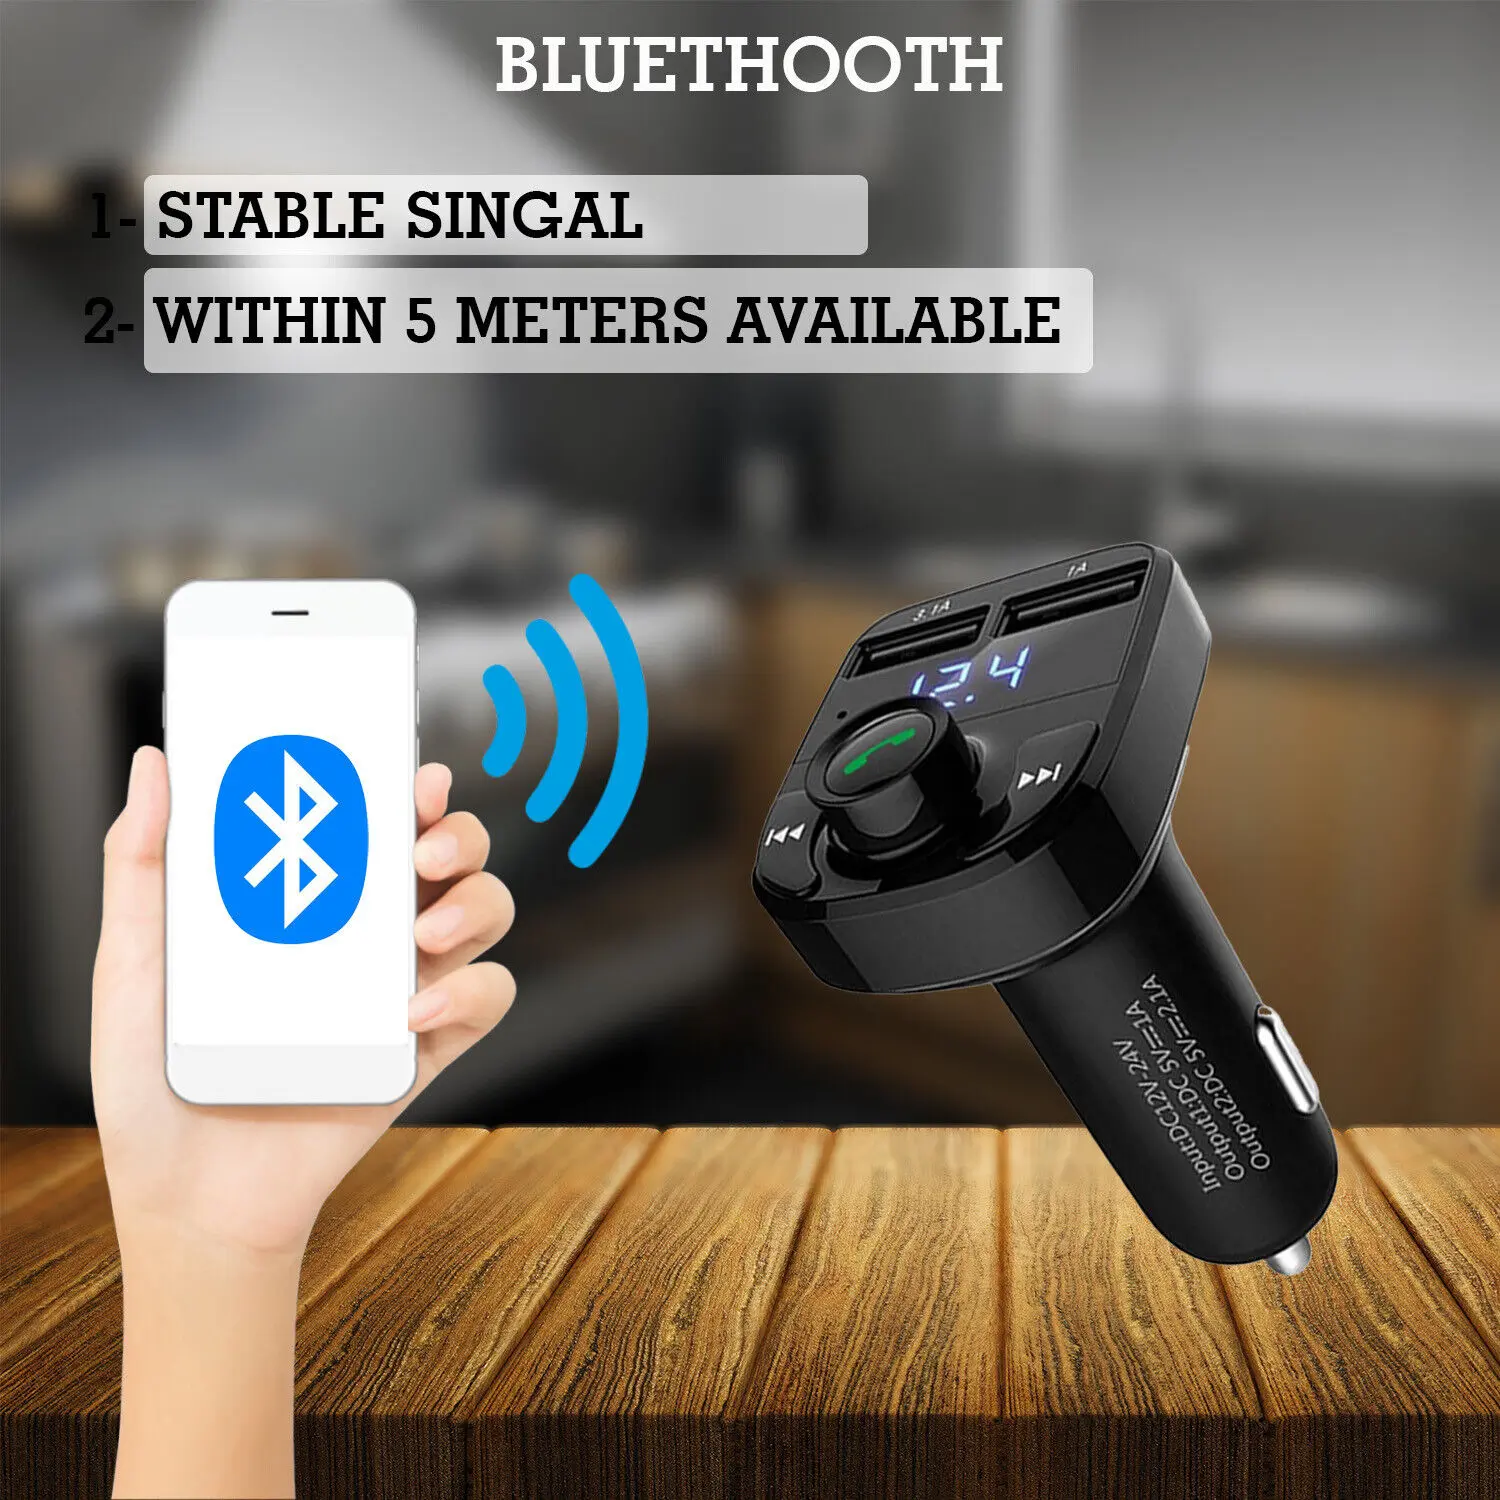 Car X8 Wireless Bluetooth FM Transmitter Kit USB Fast Charger Adapter Mp3  Player - Letshop.dz